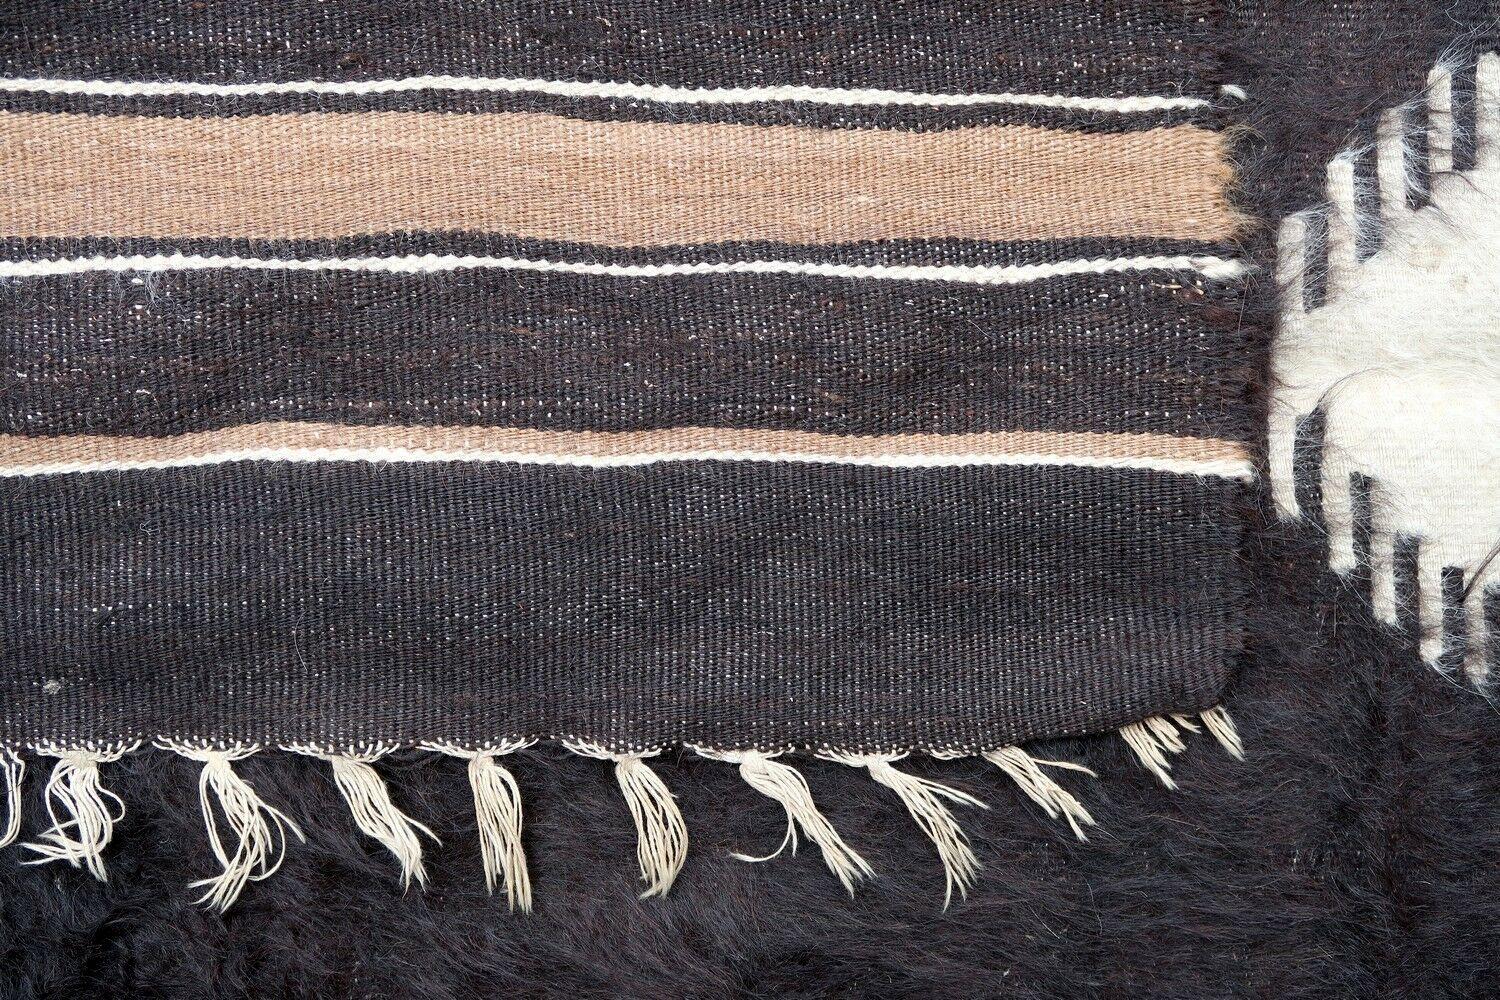 Vintage rug from Syria made in Angora wool in dark brown color. The rug is from the middle of 20th century in original good condition.

-condition: original good,

-circa: 1950s,

-size: 4' x 5.9' (124cm x 180cm),

-material: Angora